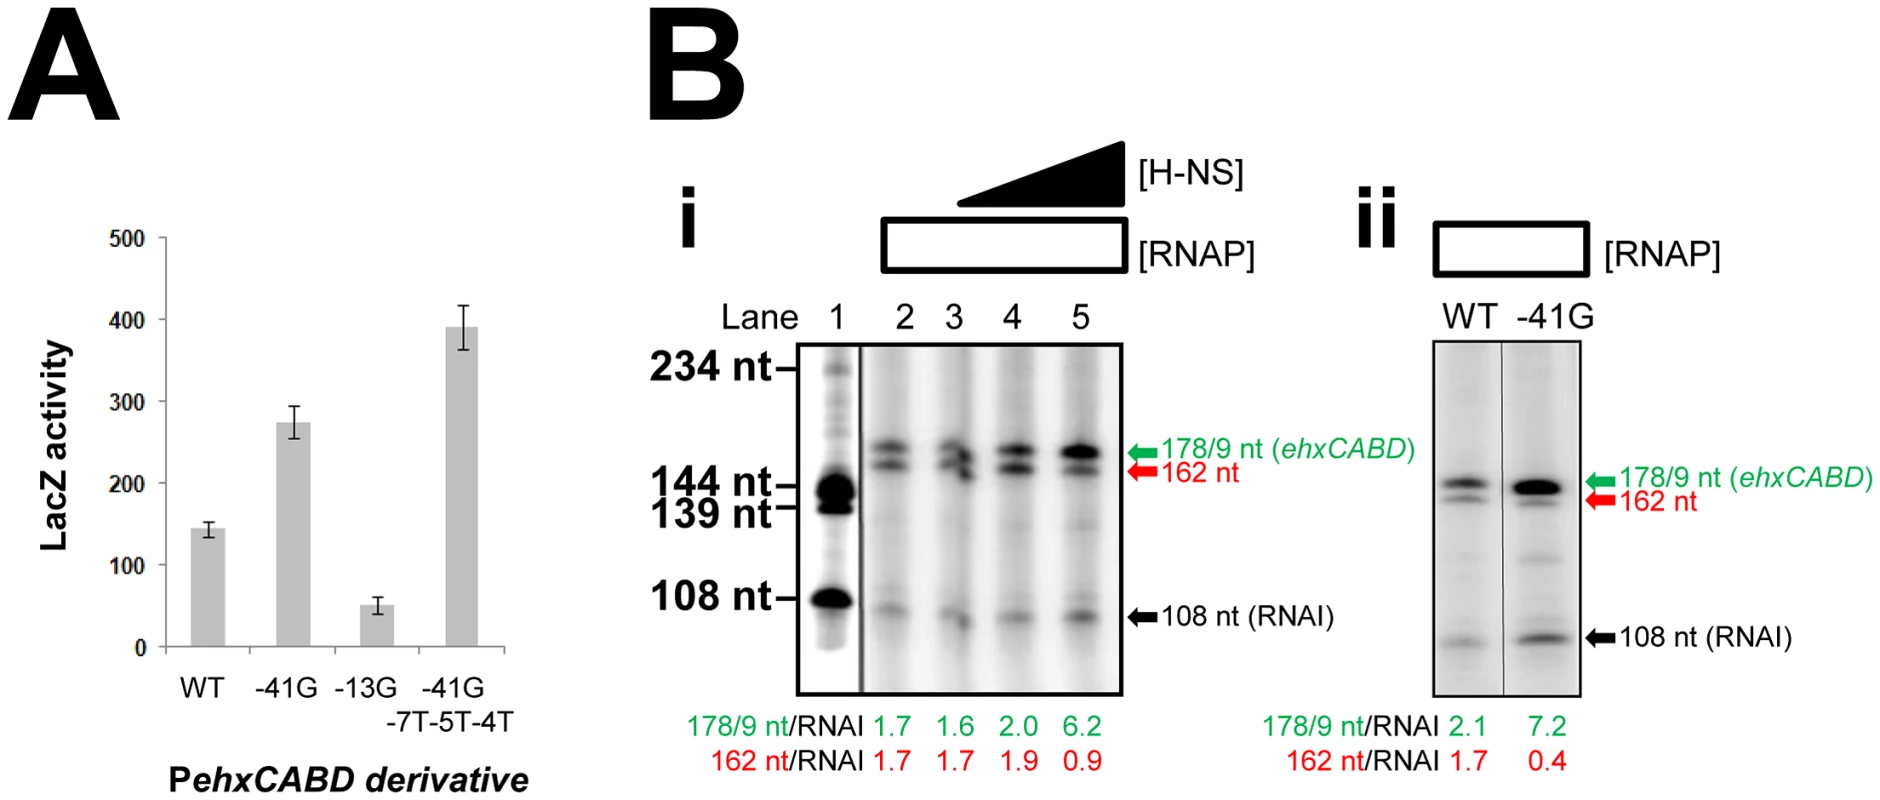 Transcription from P<i>ehxCABD</i> is inhibited by overlapping RNA polymerase binding sites.